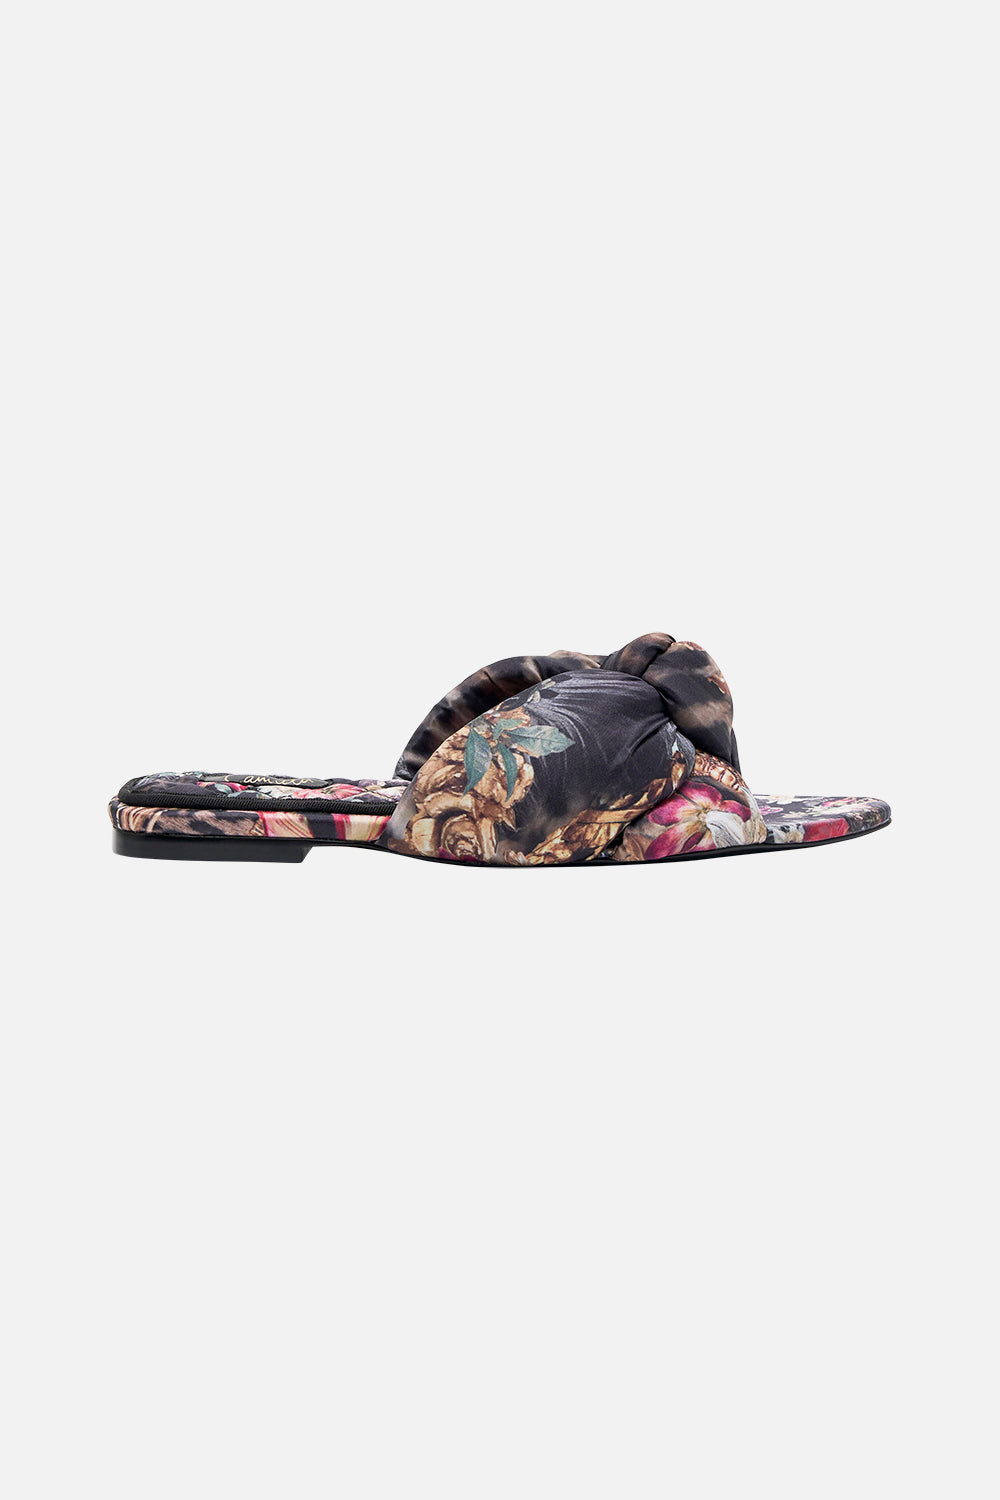 Product view of CAMILLA floral print knotted mule in A Night At The Opera print